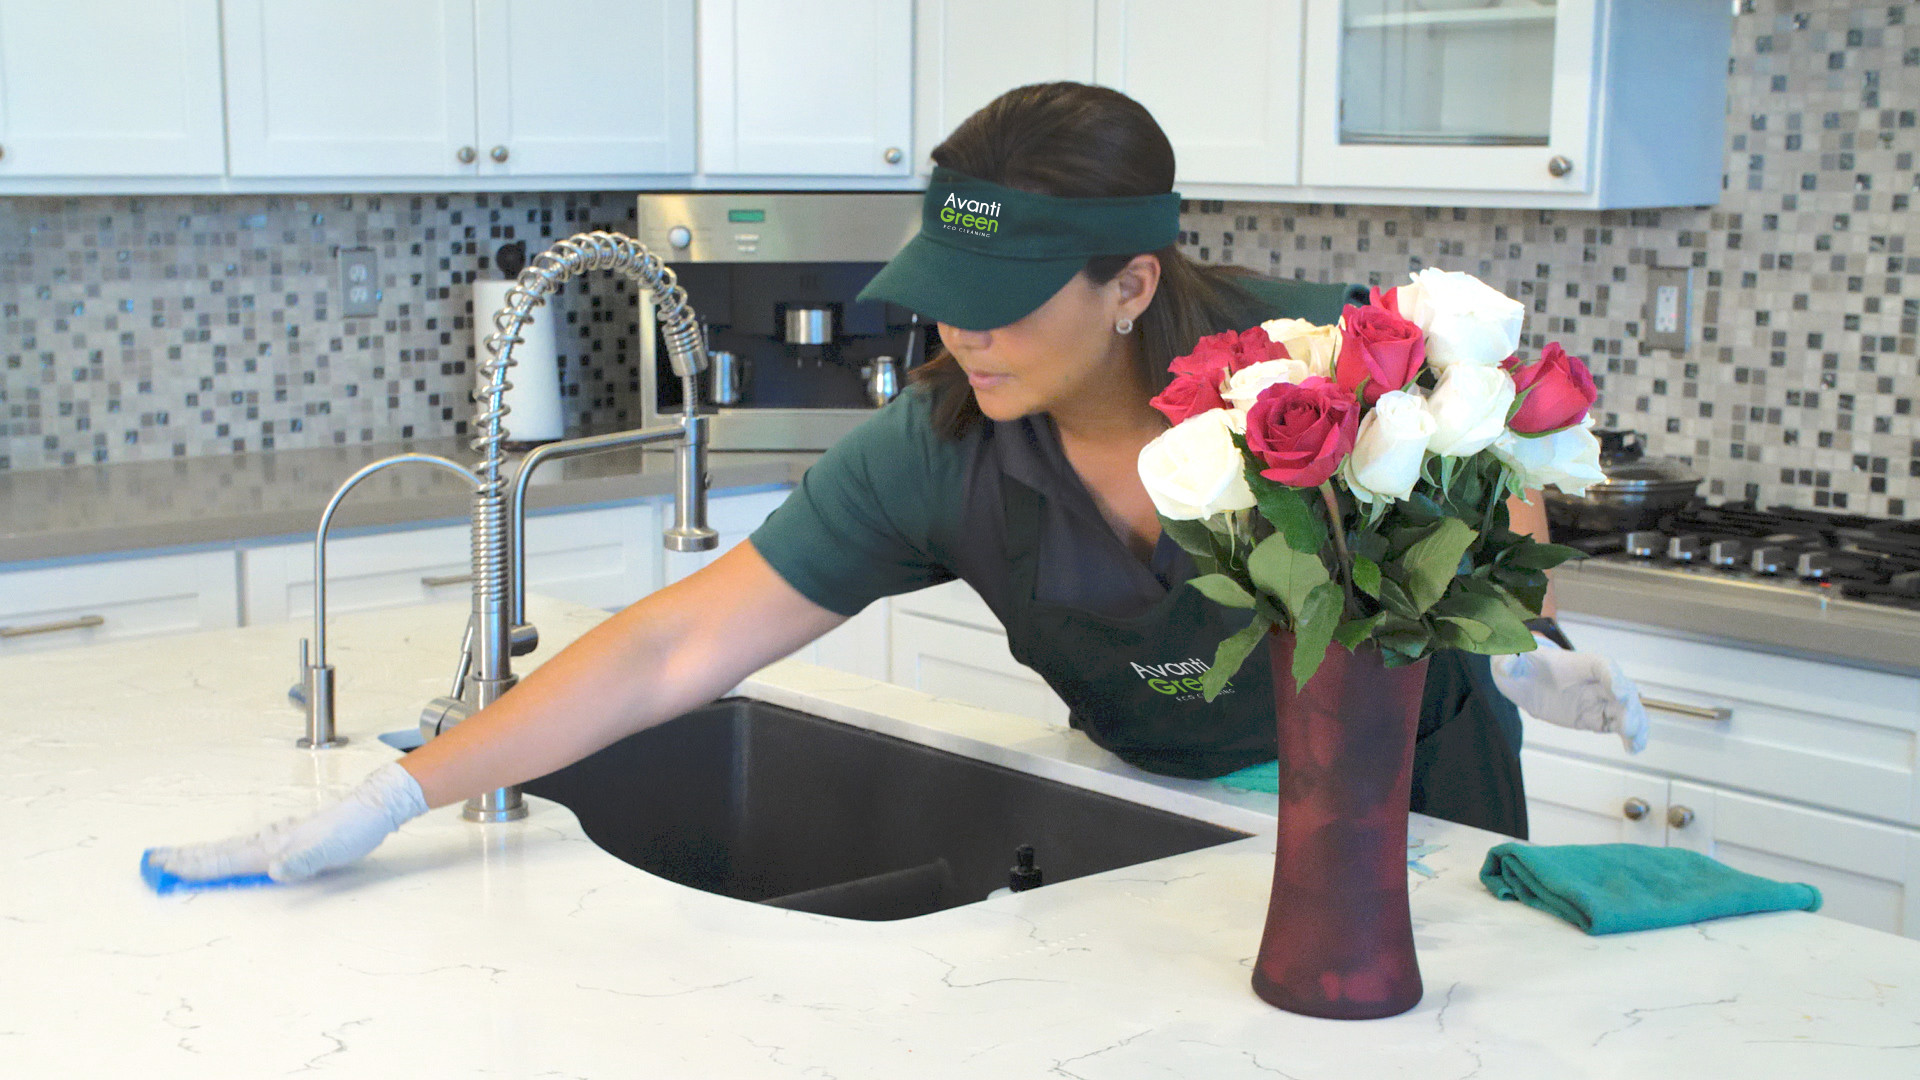 House Cleaning Services in Las Vegas, NV: Call Us to Book